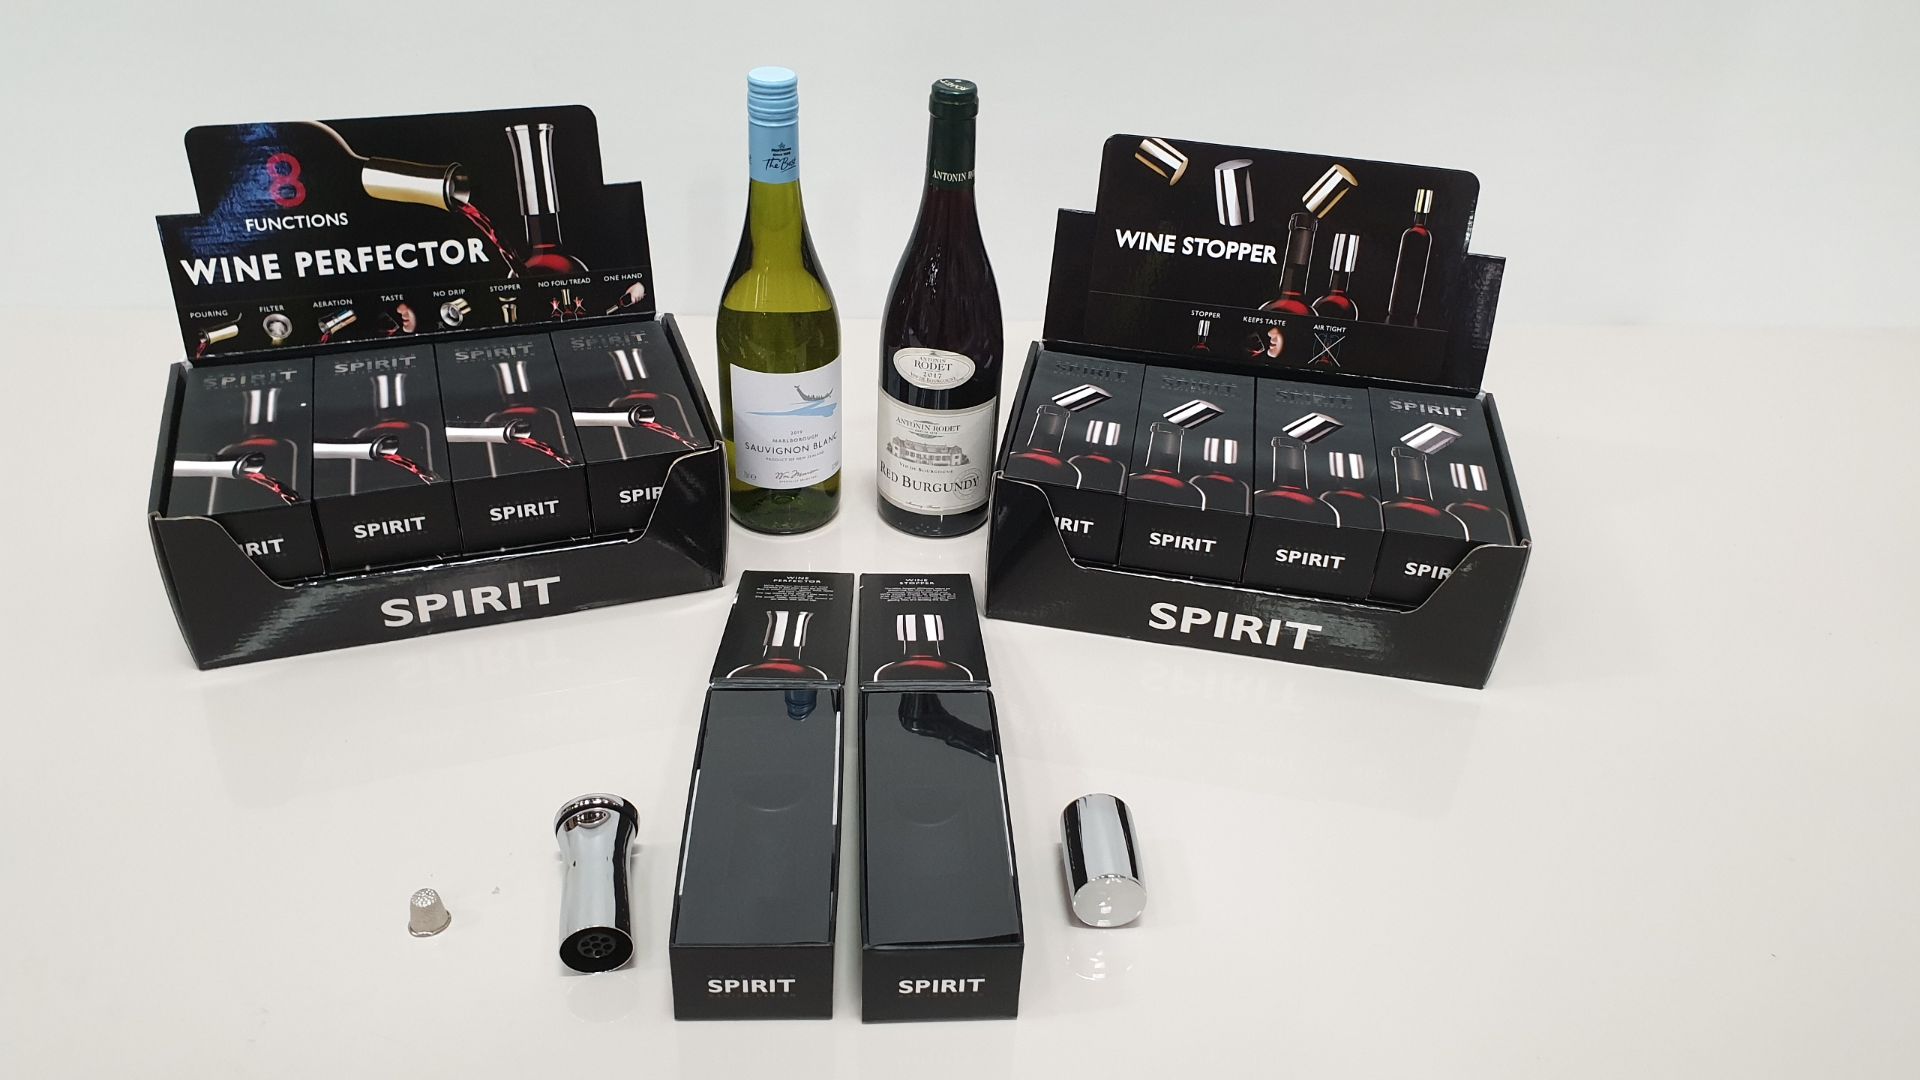 32 X NORDITION SILVER COLOURED SPIRIT WINE ACCESSORIES IN 4 DISPLAY CARTONS - 2 OF EACH - (16 X WINE